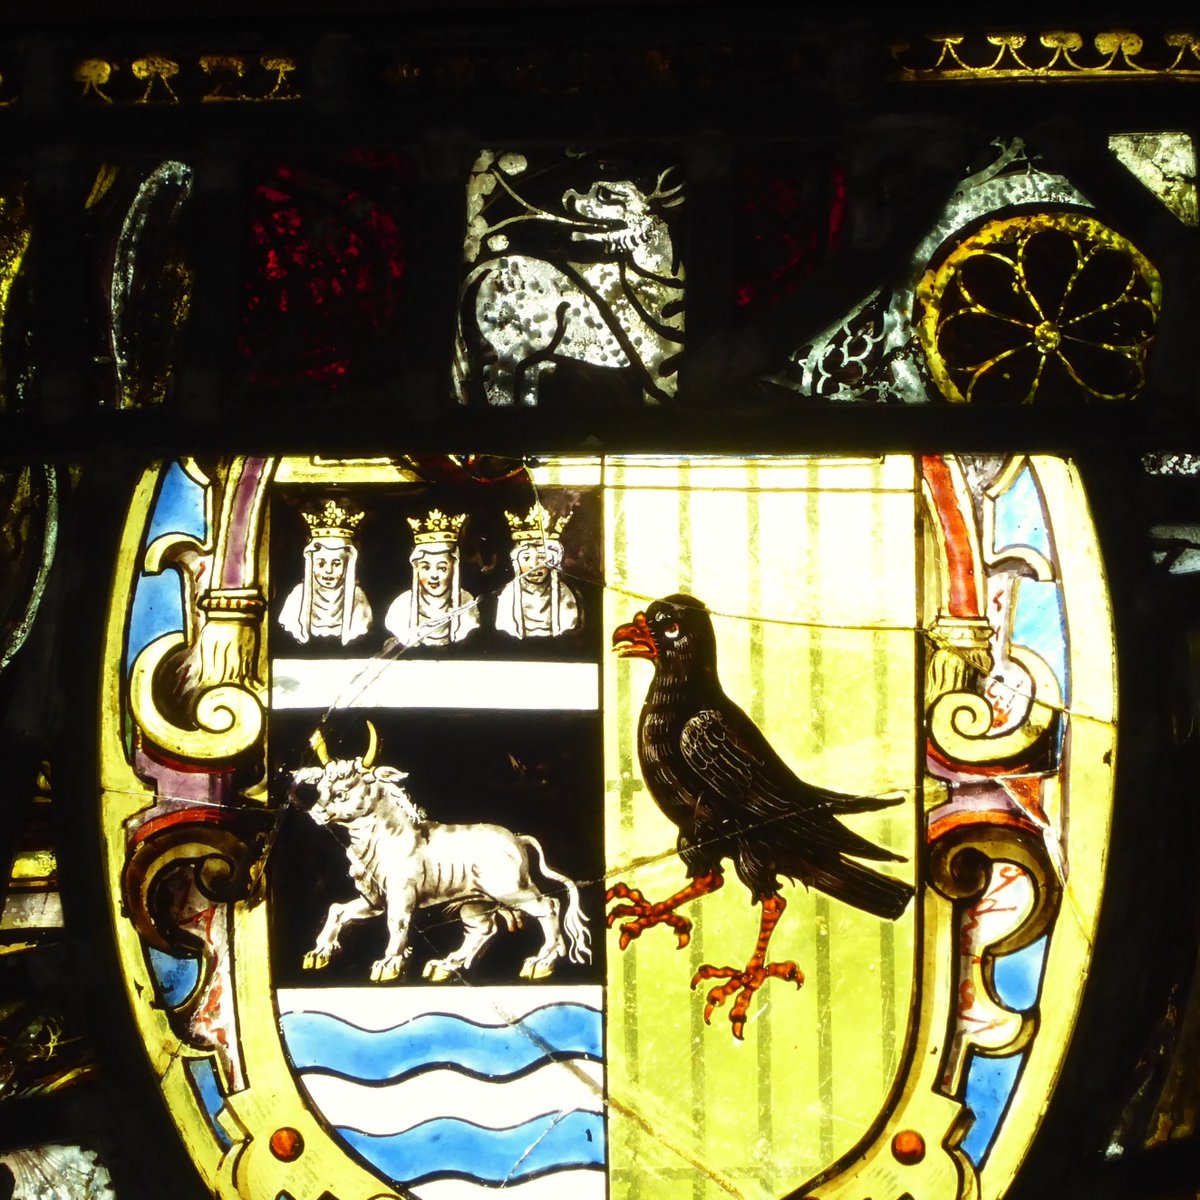 #LesArmoiriesDuVendredi in St Bartholomew's, Brightwell Baldwin.

A chough seems to look somewhat nervously up at a spirited creature breathing out a sprig of foliage - an emblem for me of the spring bursting forth in this part of rural Oxfordshire.

That's a rather shaggy ox!